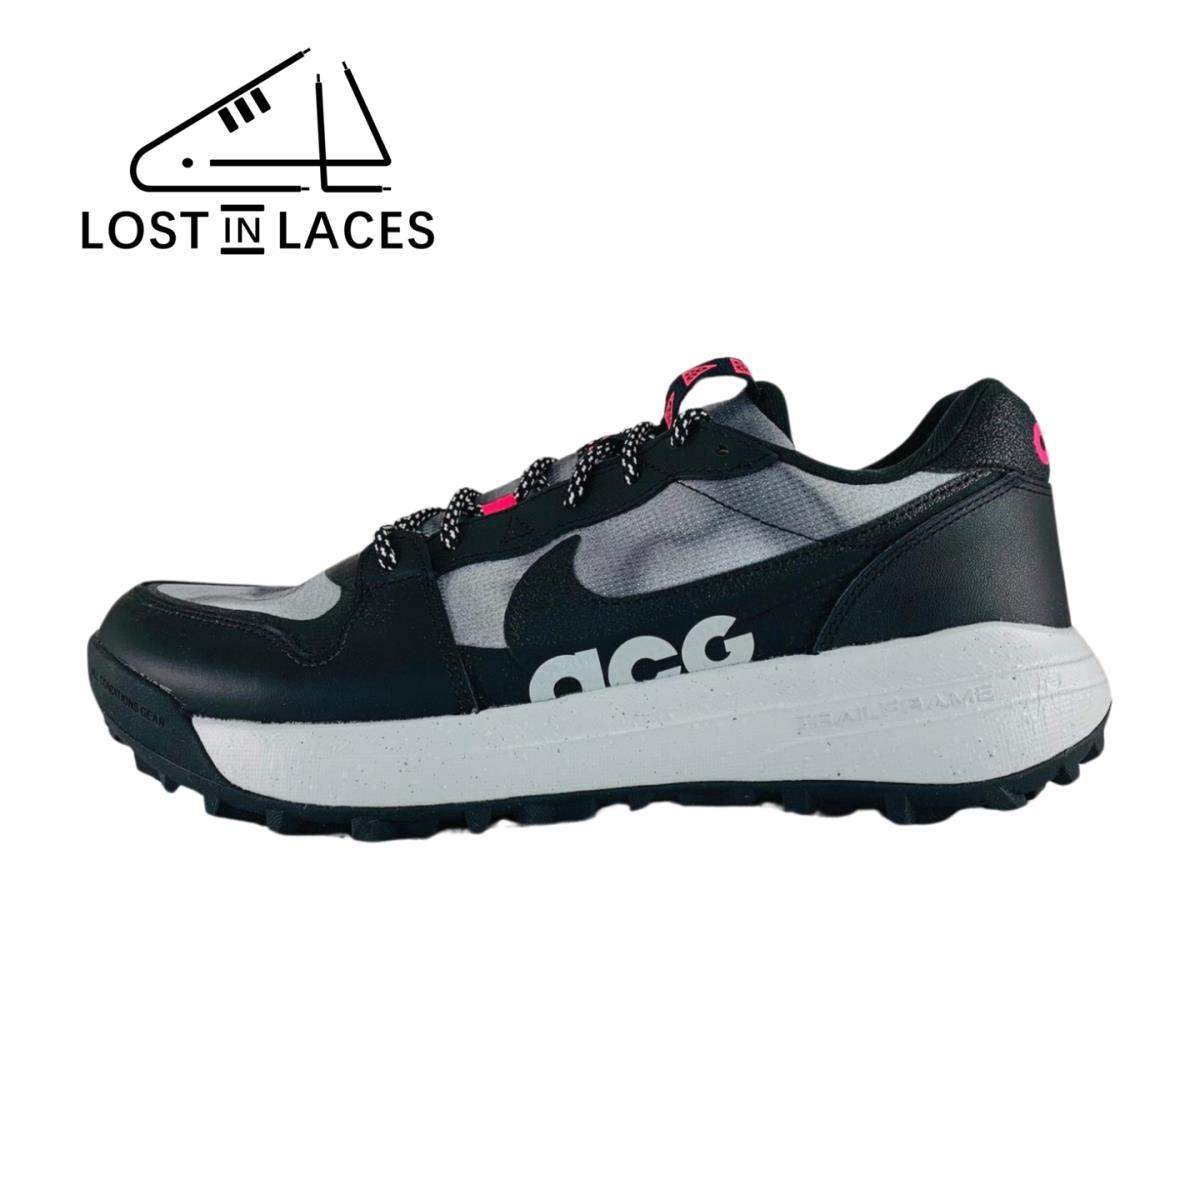 Nike Acg Lowcate Grey Pink Hiking Shoes Trail Running Shoes Men`s Sizes - Gray